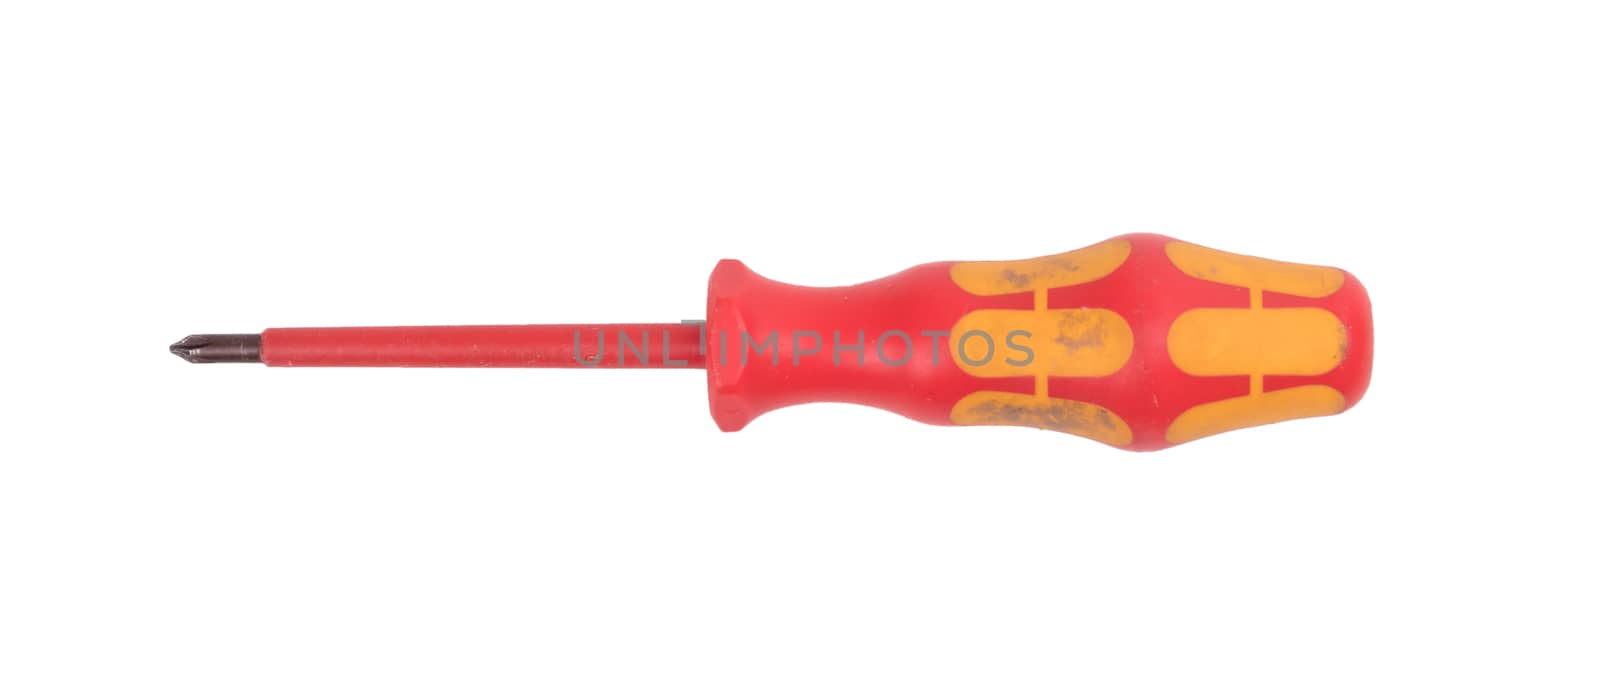 Red screwdriver isolated on a white background